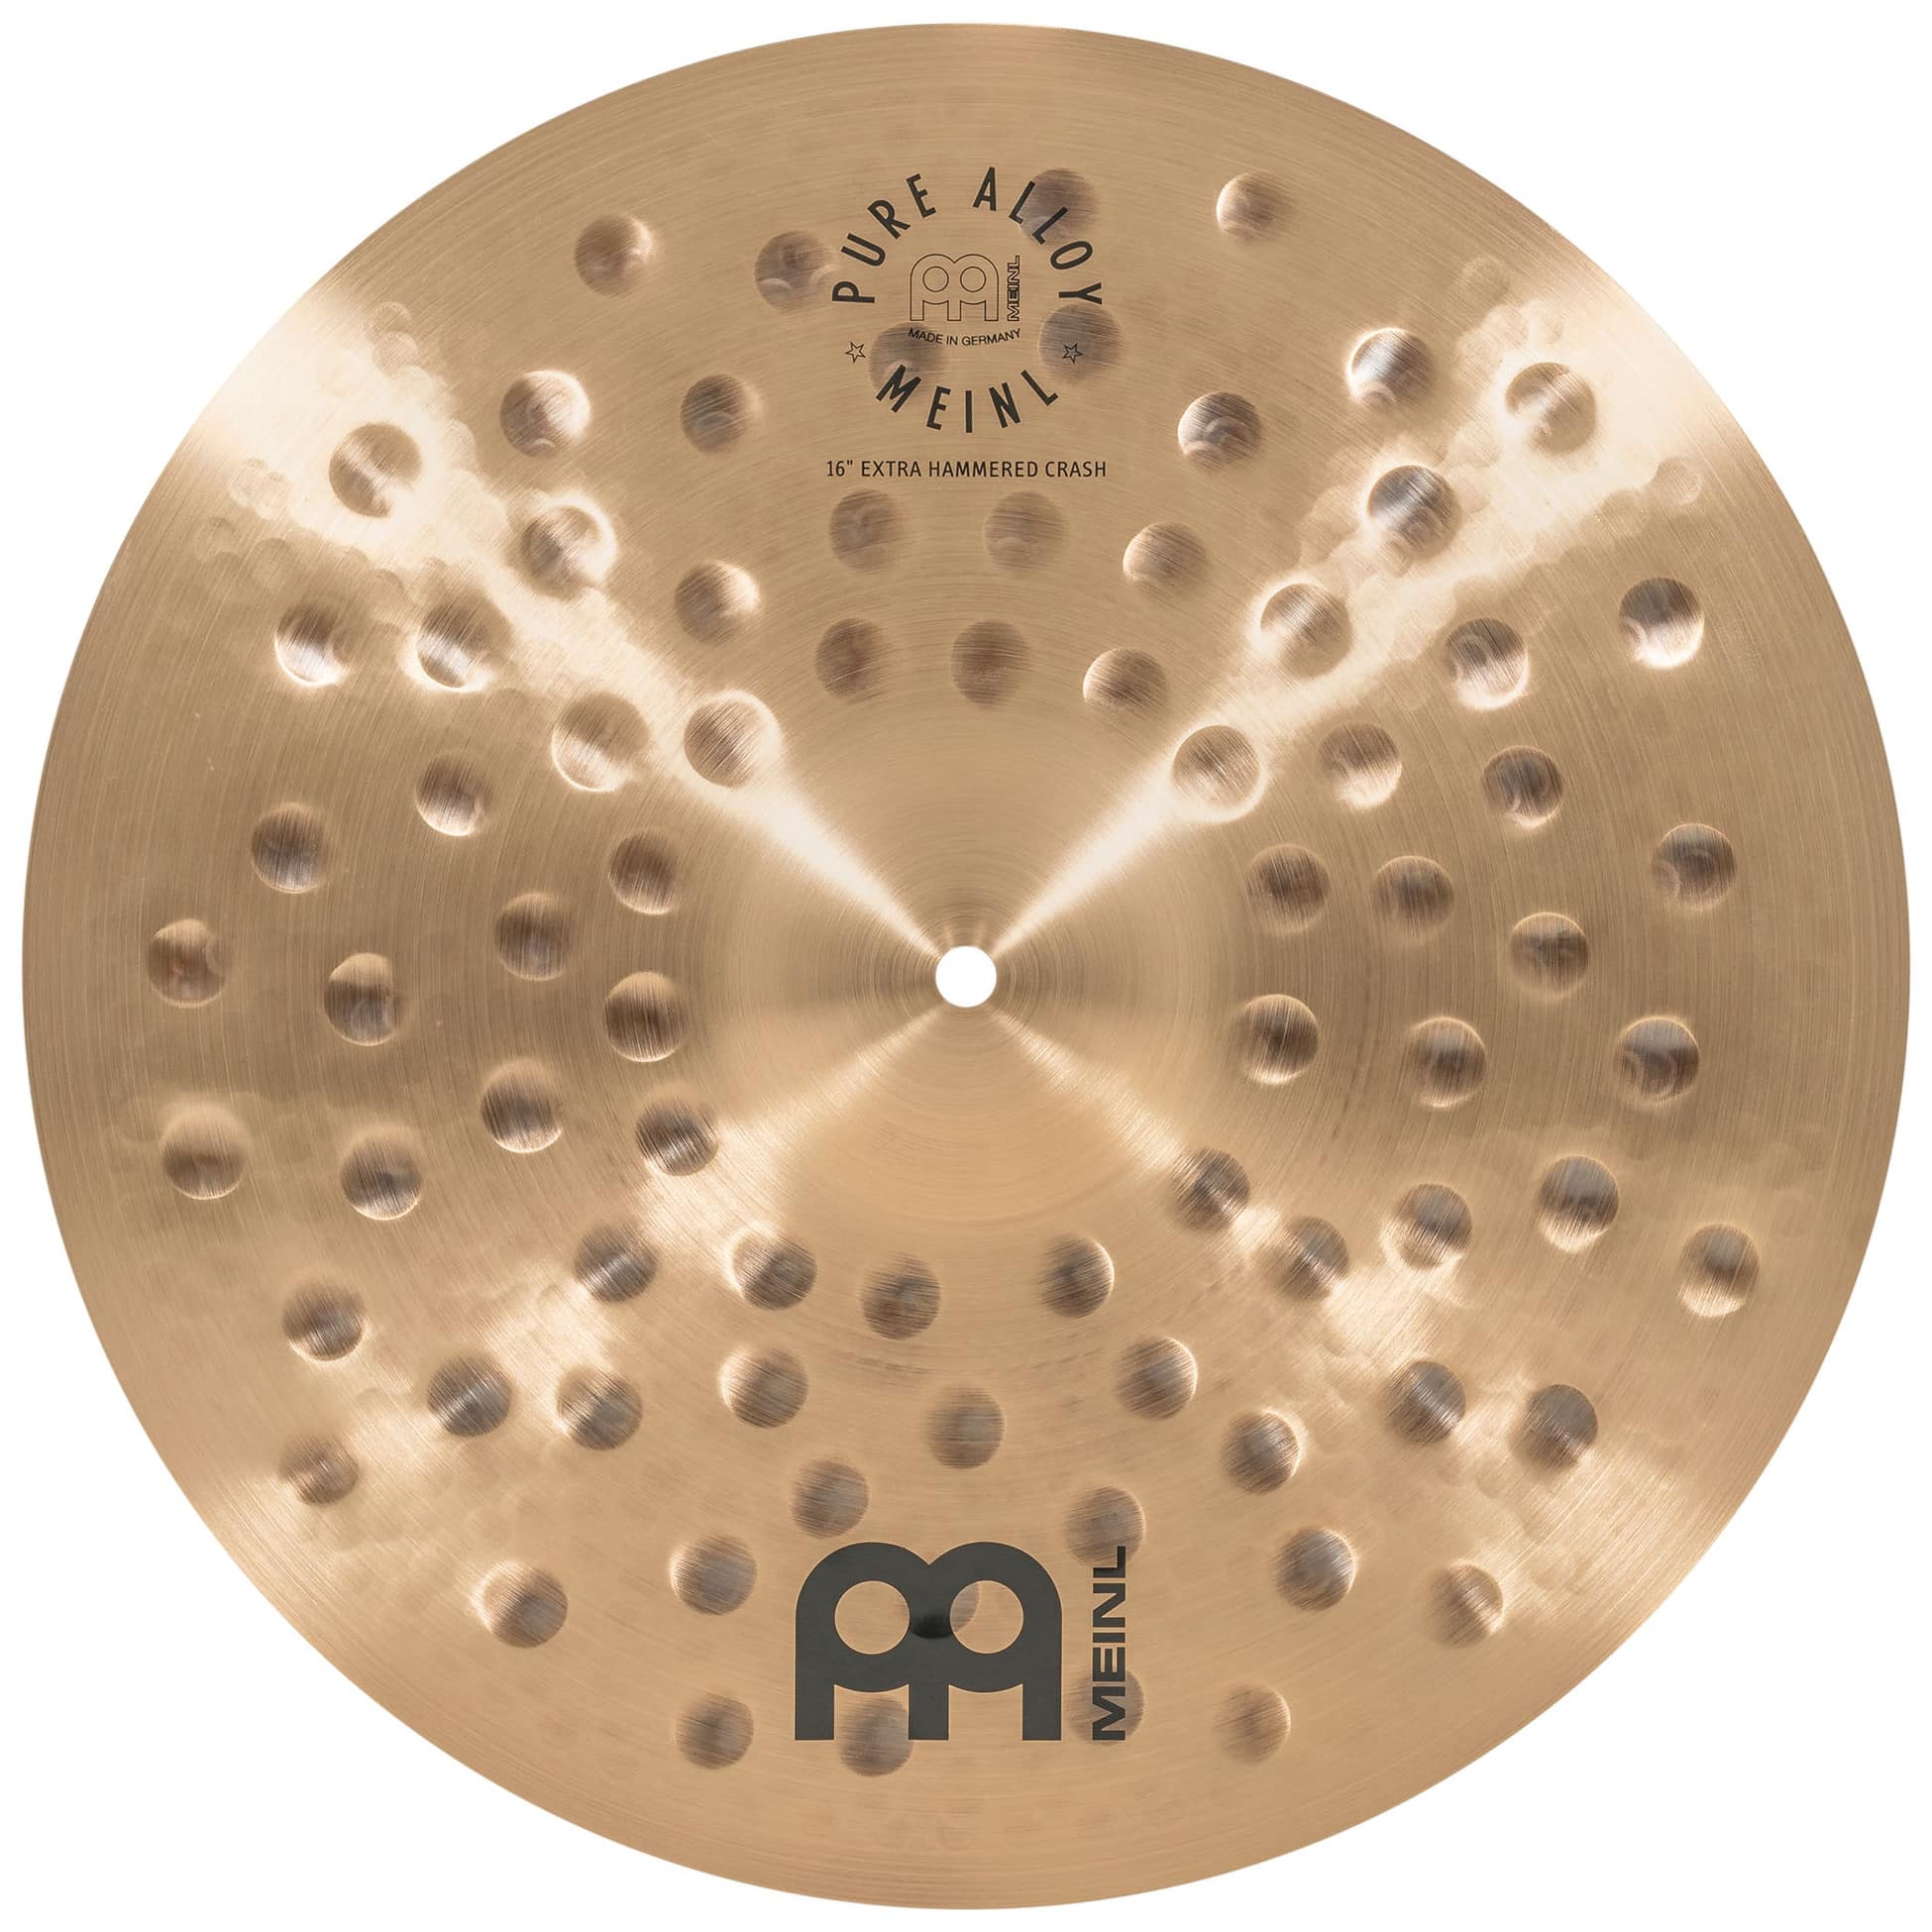 Meinl Cymbals PA16EHC - 16" Pure Alloy Extra Hammered Crash